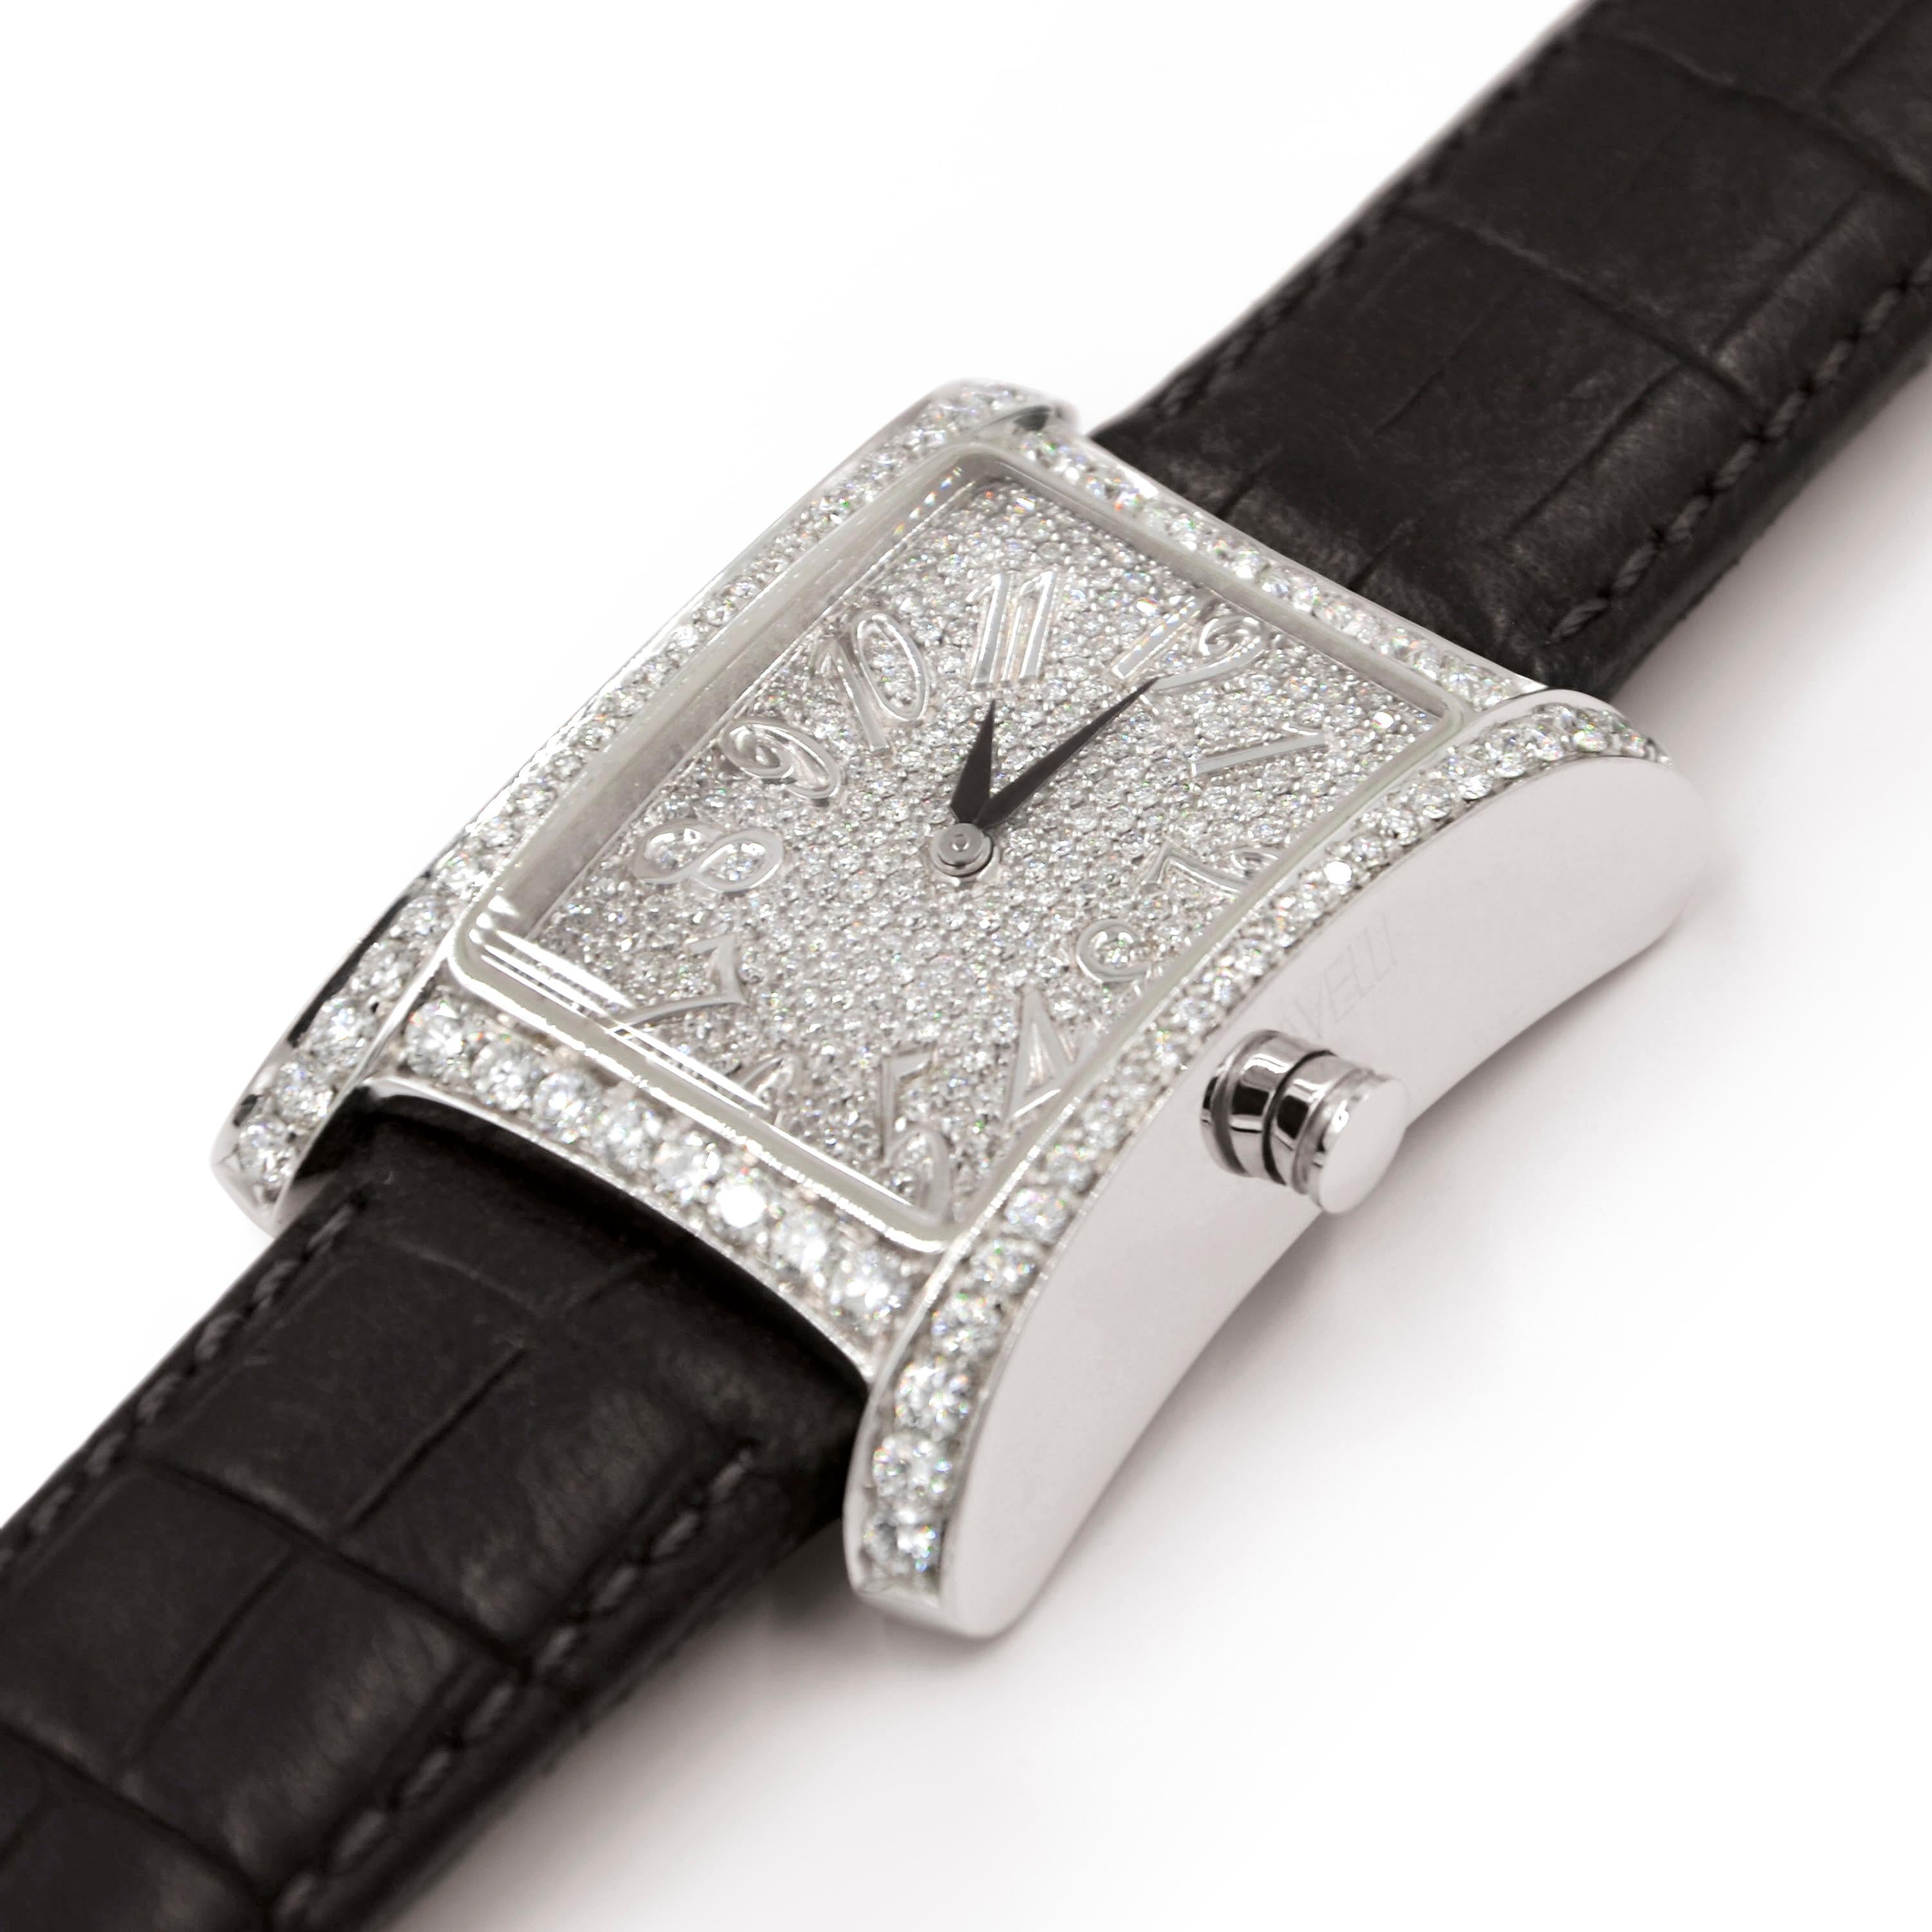 Garavelli  18 Karat White Gold Watch with White Diamonds and black leather strap
 steel   grams : 3,00
GOLD  : grams 71,40
WHITE DIAMONDS ct : 5,28
Made in Italy
Swiss ETA Quartz Movement  with battery
Guarantee 3 years